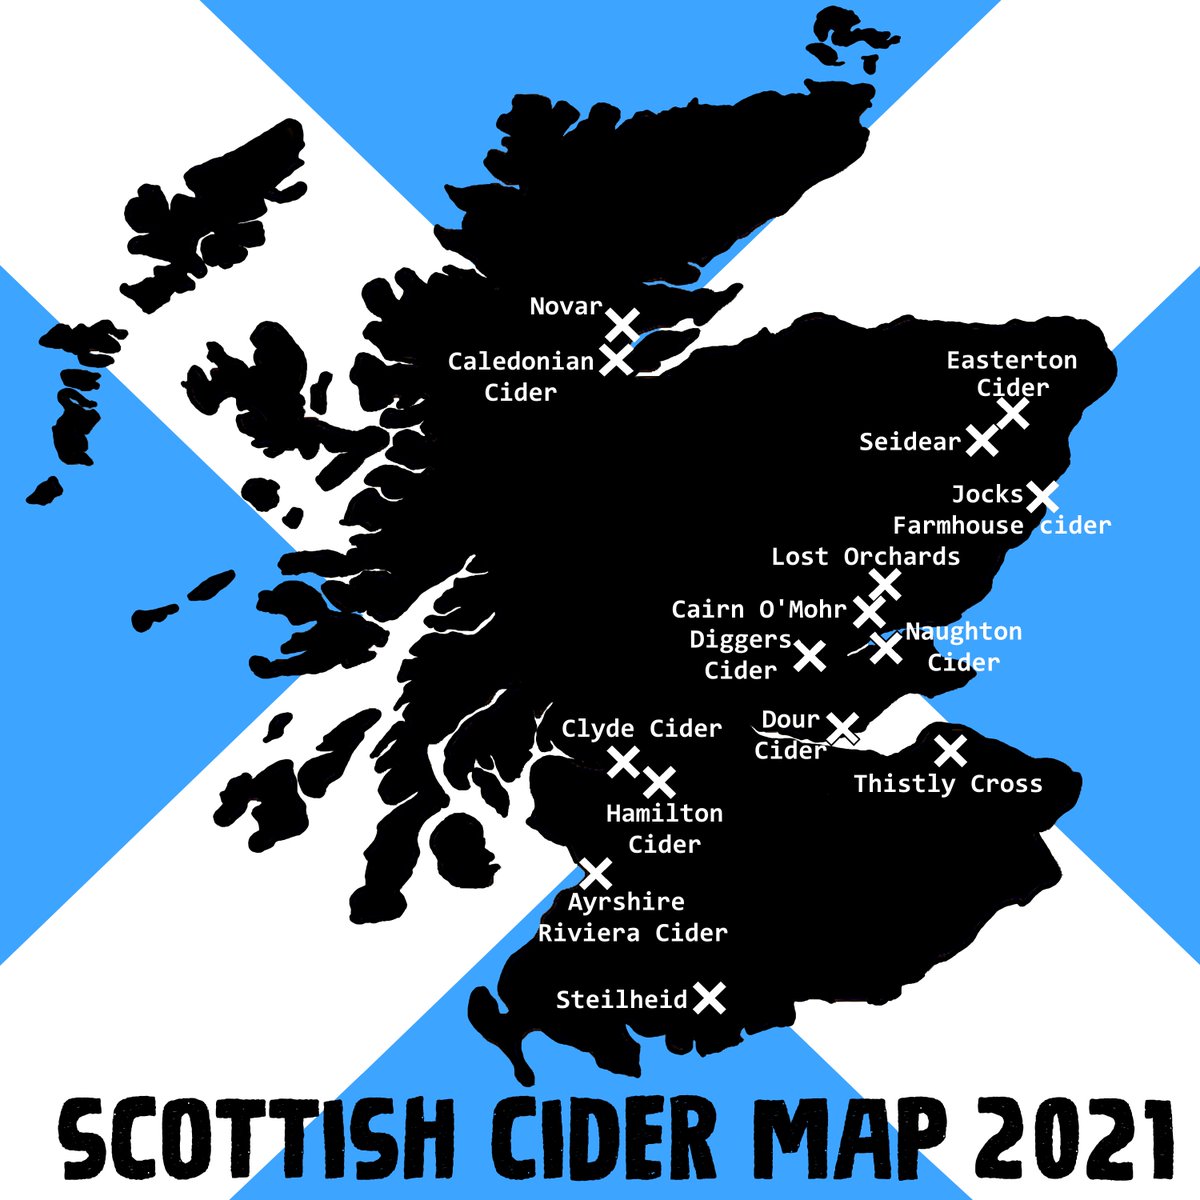 It's been a year since the last Scottish Cider Map update and I'm delighted to add Easterton Cider, Dour Cider, Diggers Cider and Jocks Farmhouse Cider. That's Scotland up to 15 cidermakers now!
🏴󠁧󠁢󠁳󠁣󠁴󠁿🍎🍻#scottishcider #scottishfoodanddrink #cider #rethinkcider #Scotland #scottish